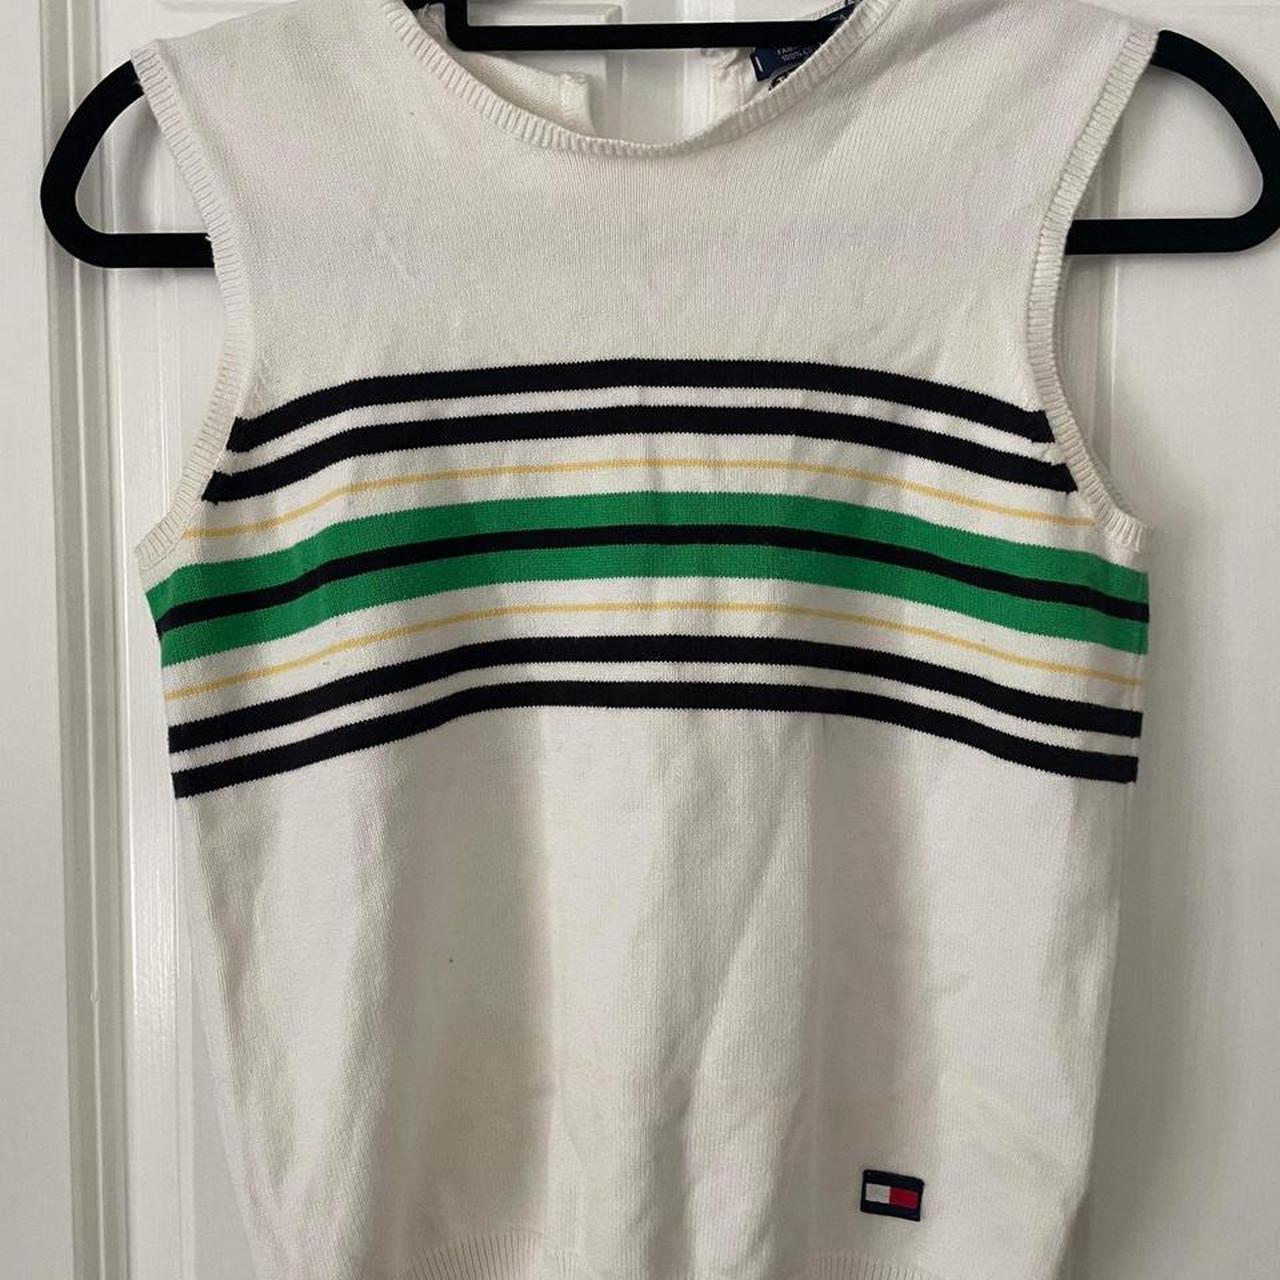 Tommy Hilfiger Women's White and Green Vests-tanks-camis | Depop